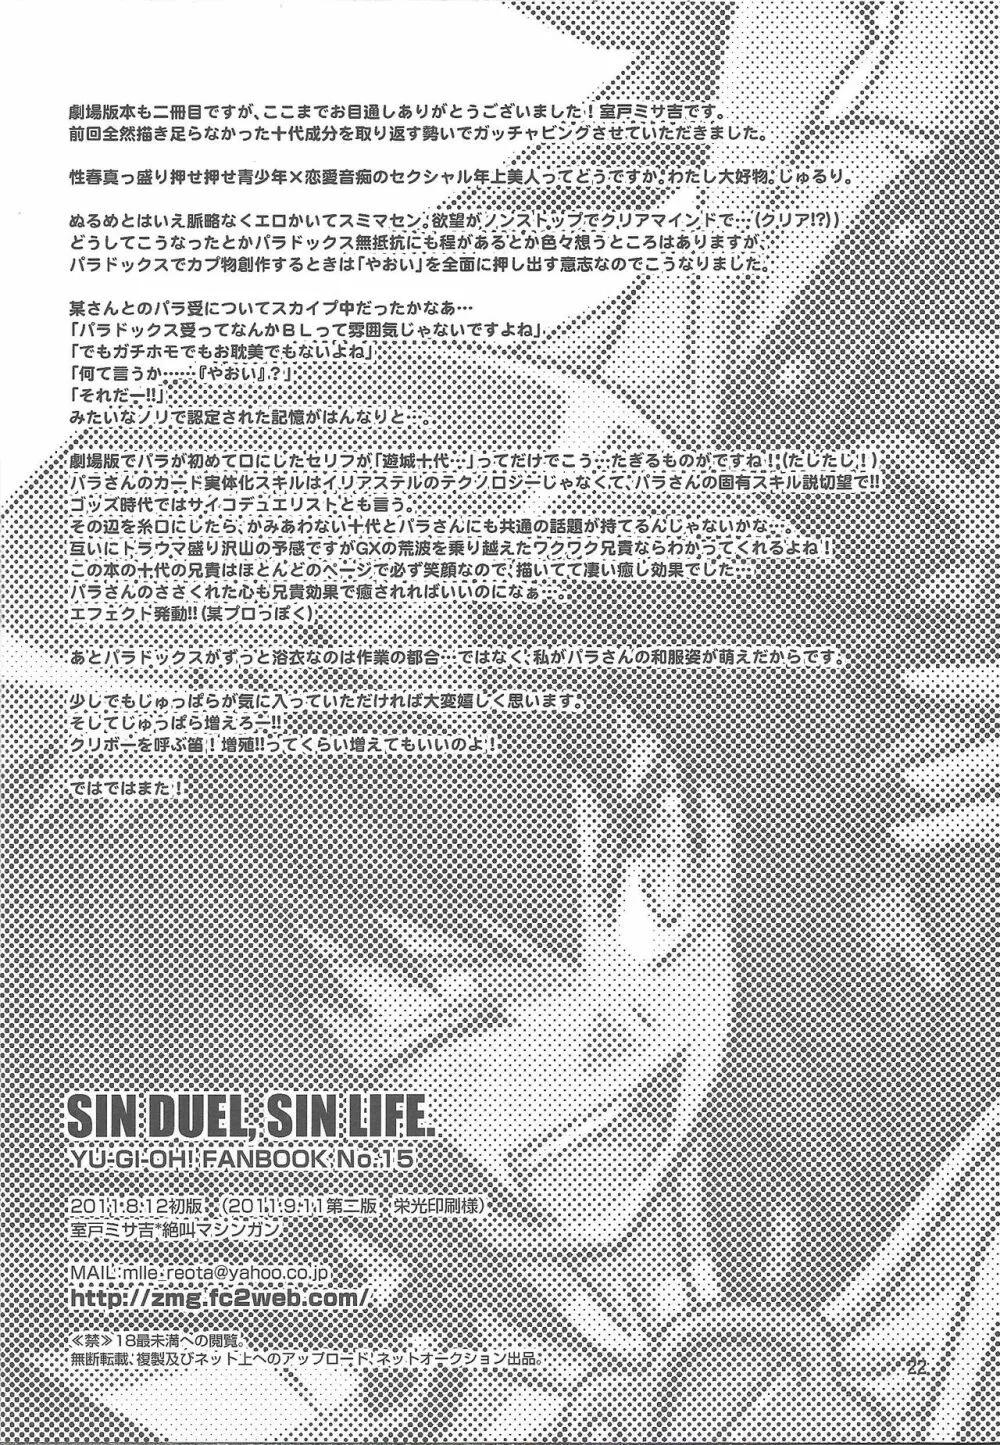 SIN DUEL，SIN LIFE. - page21